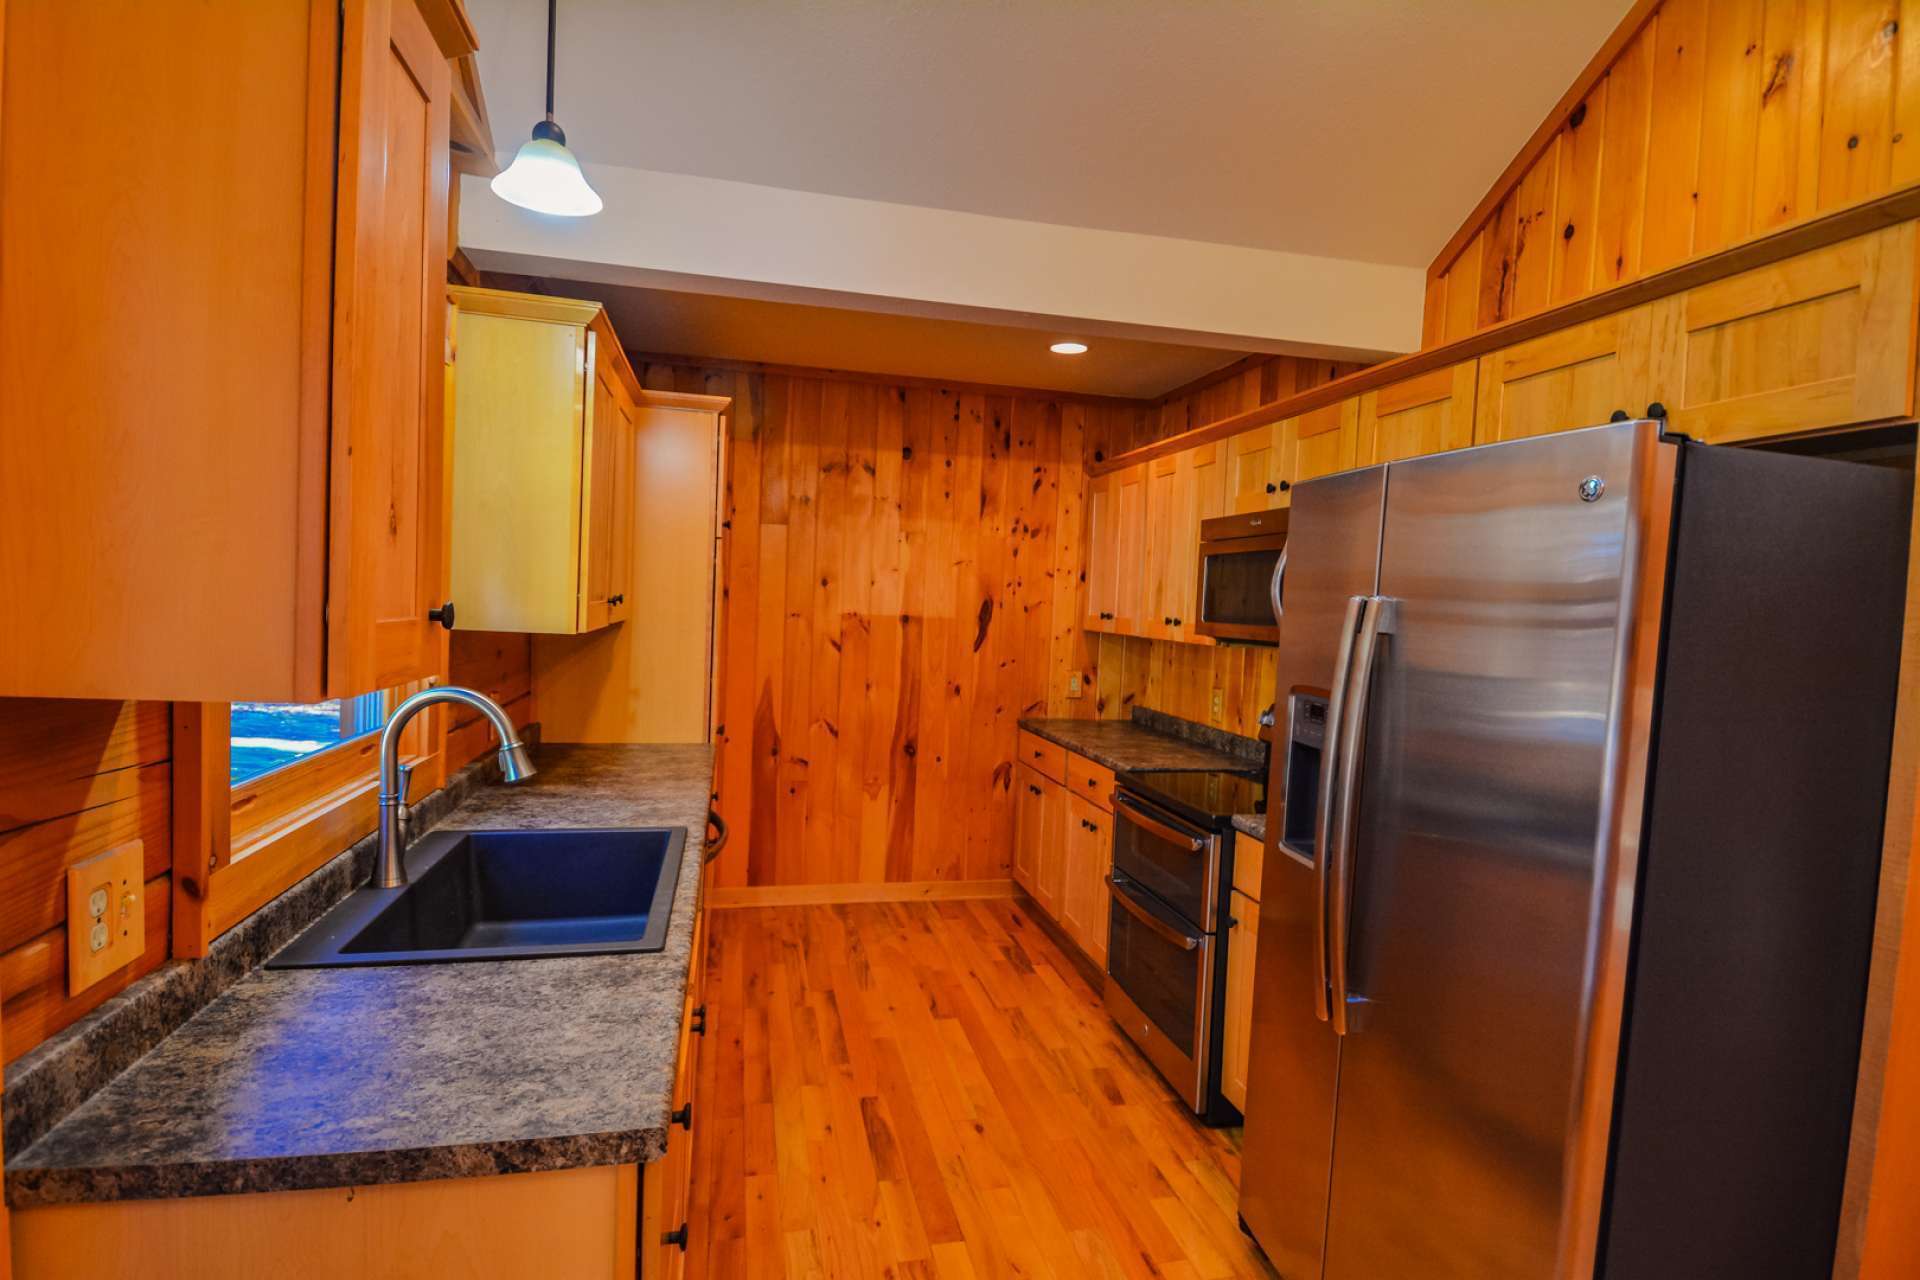 The galley style kitchen offers stainless appliances and ample work and storage space.